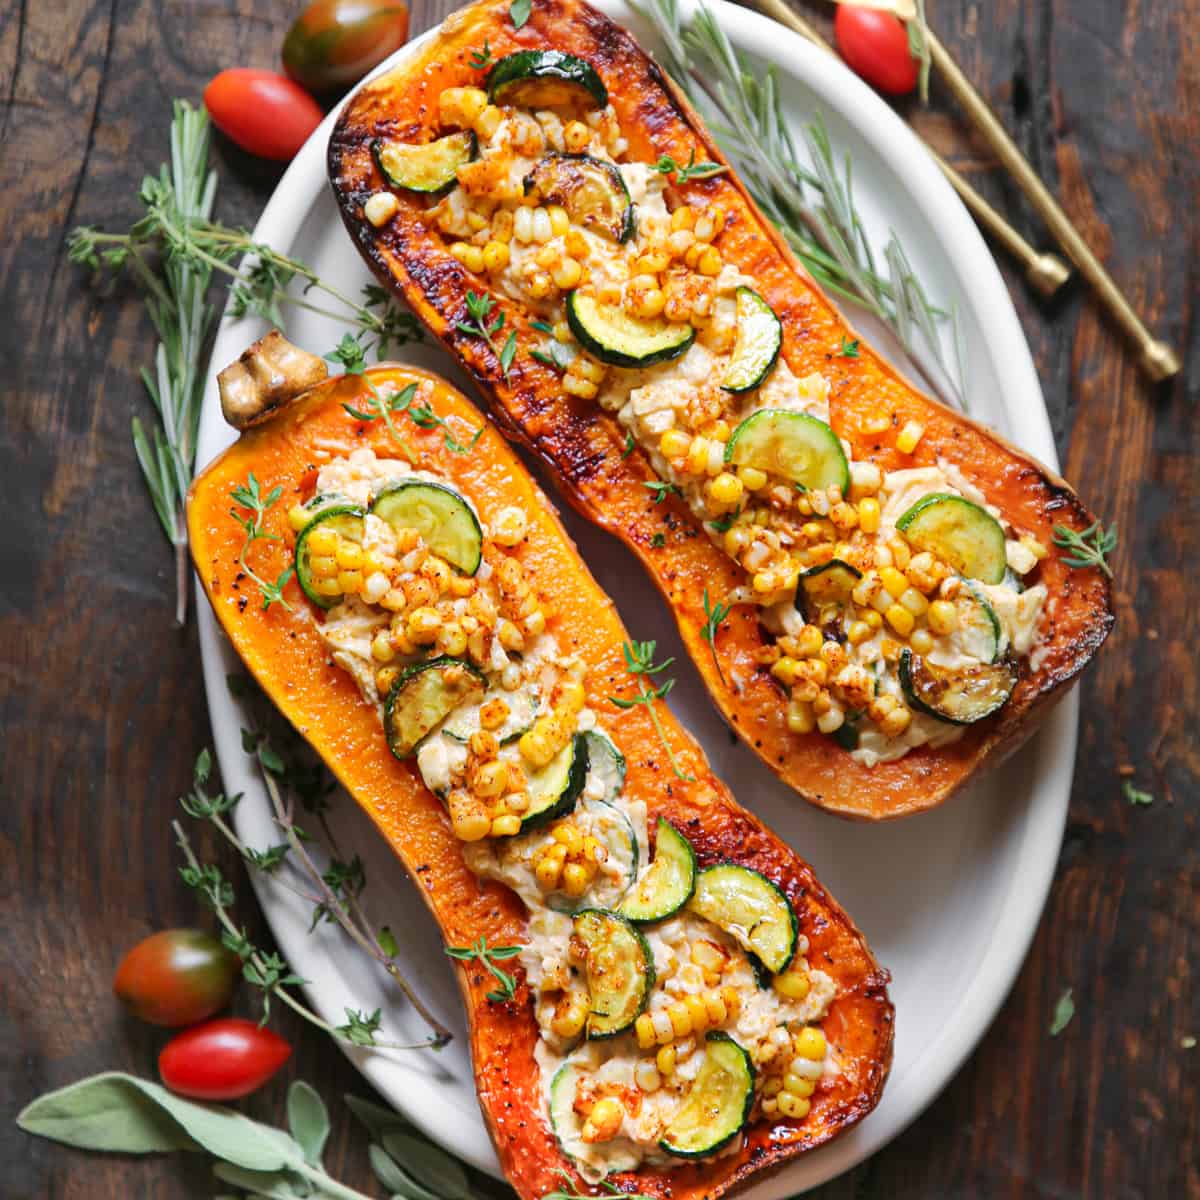 Roasted Butternut Squash (2 halves) stuffed with Corn, Zucchini, and Cheese - on a white platter.